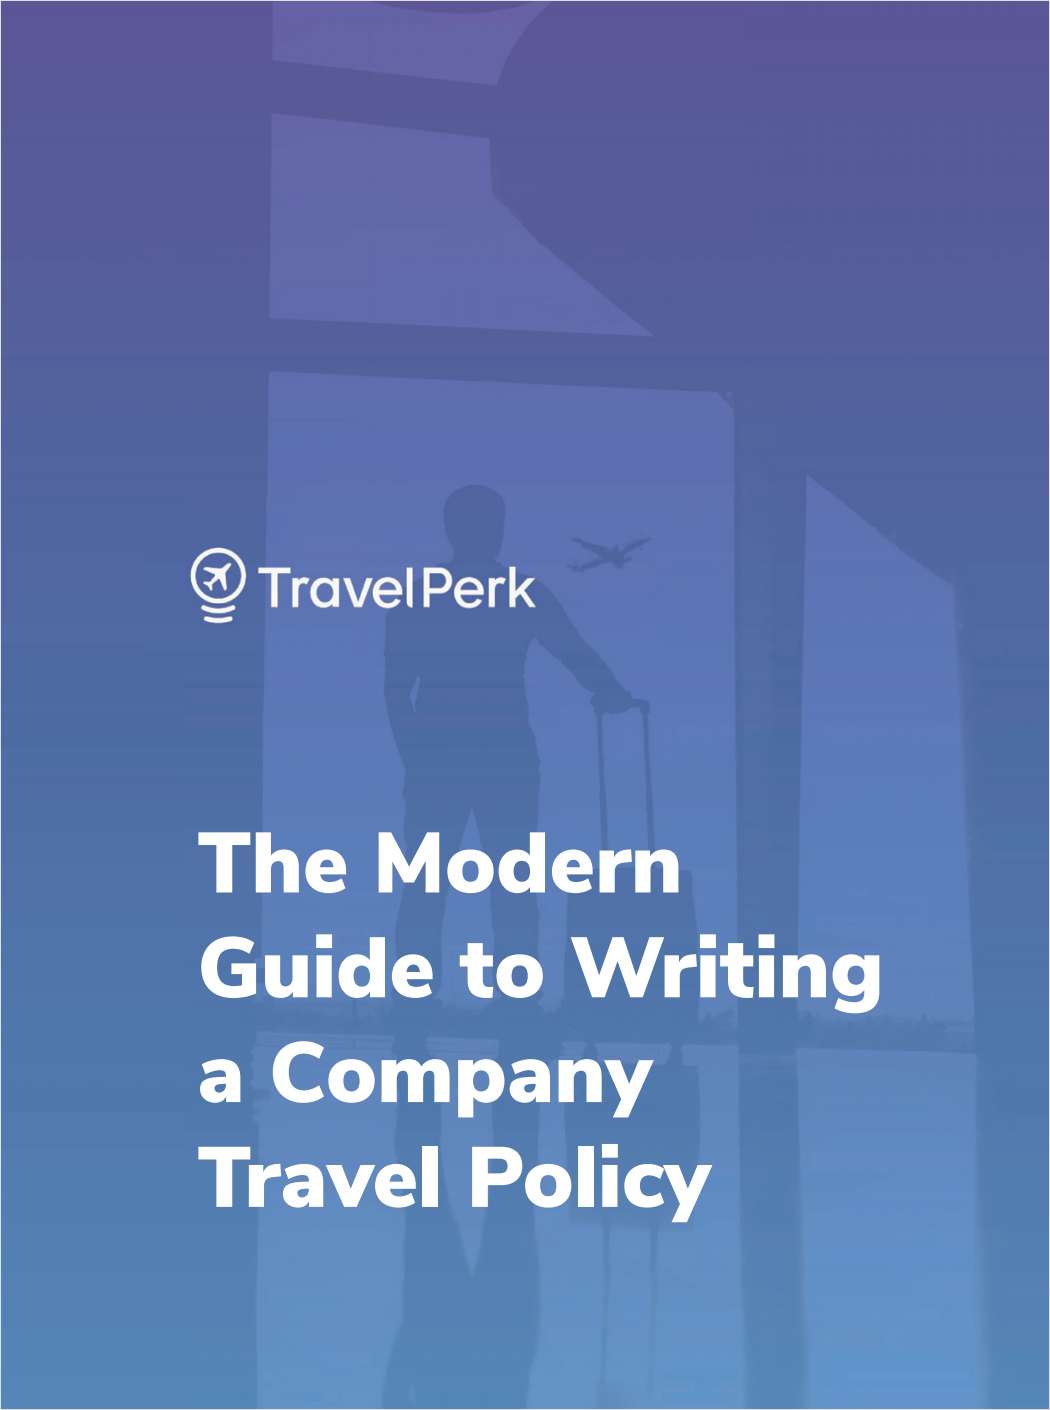 The Modern Guide to Writing a Company Travel Policy